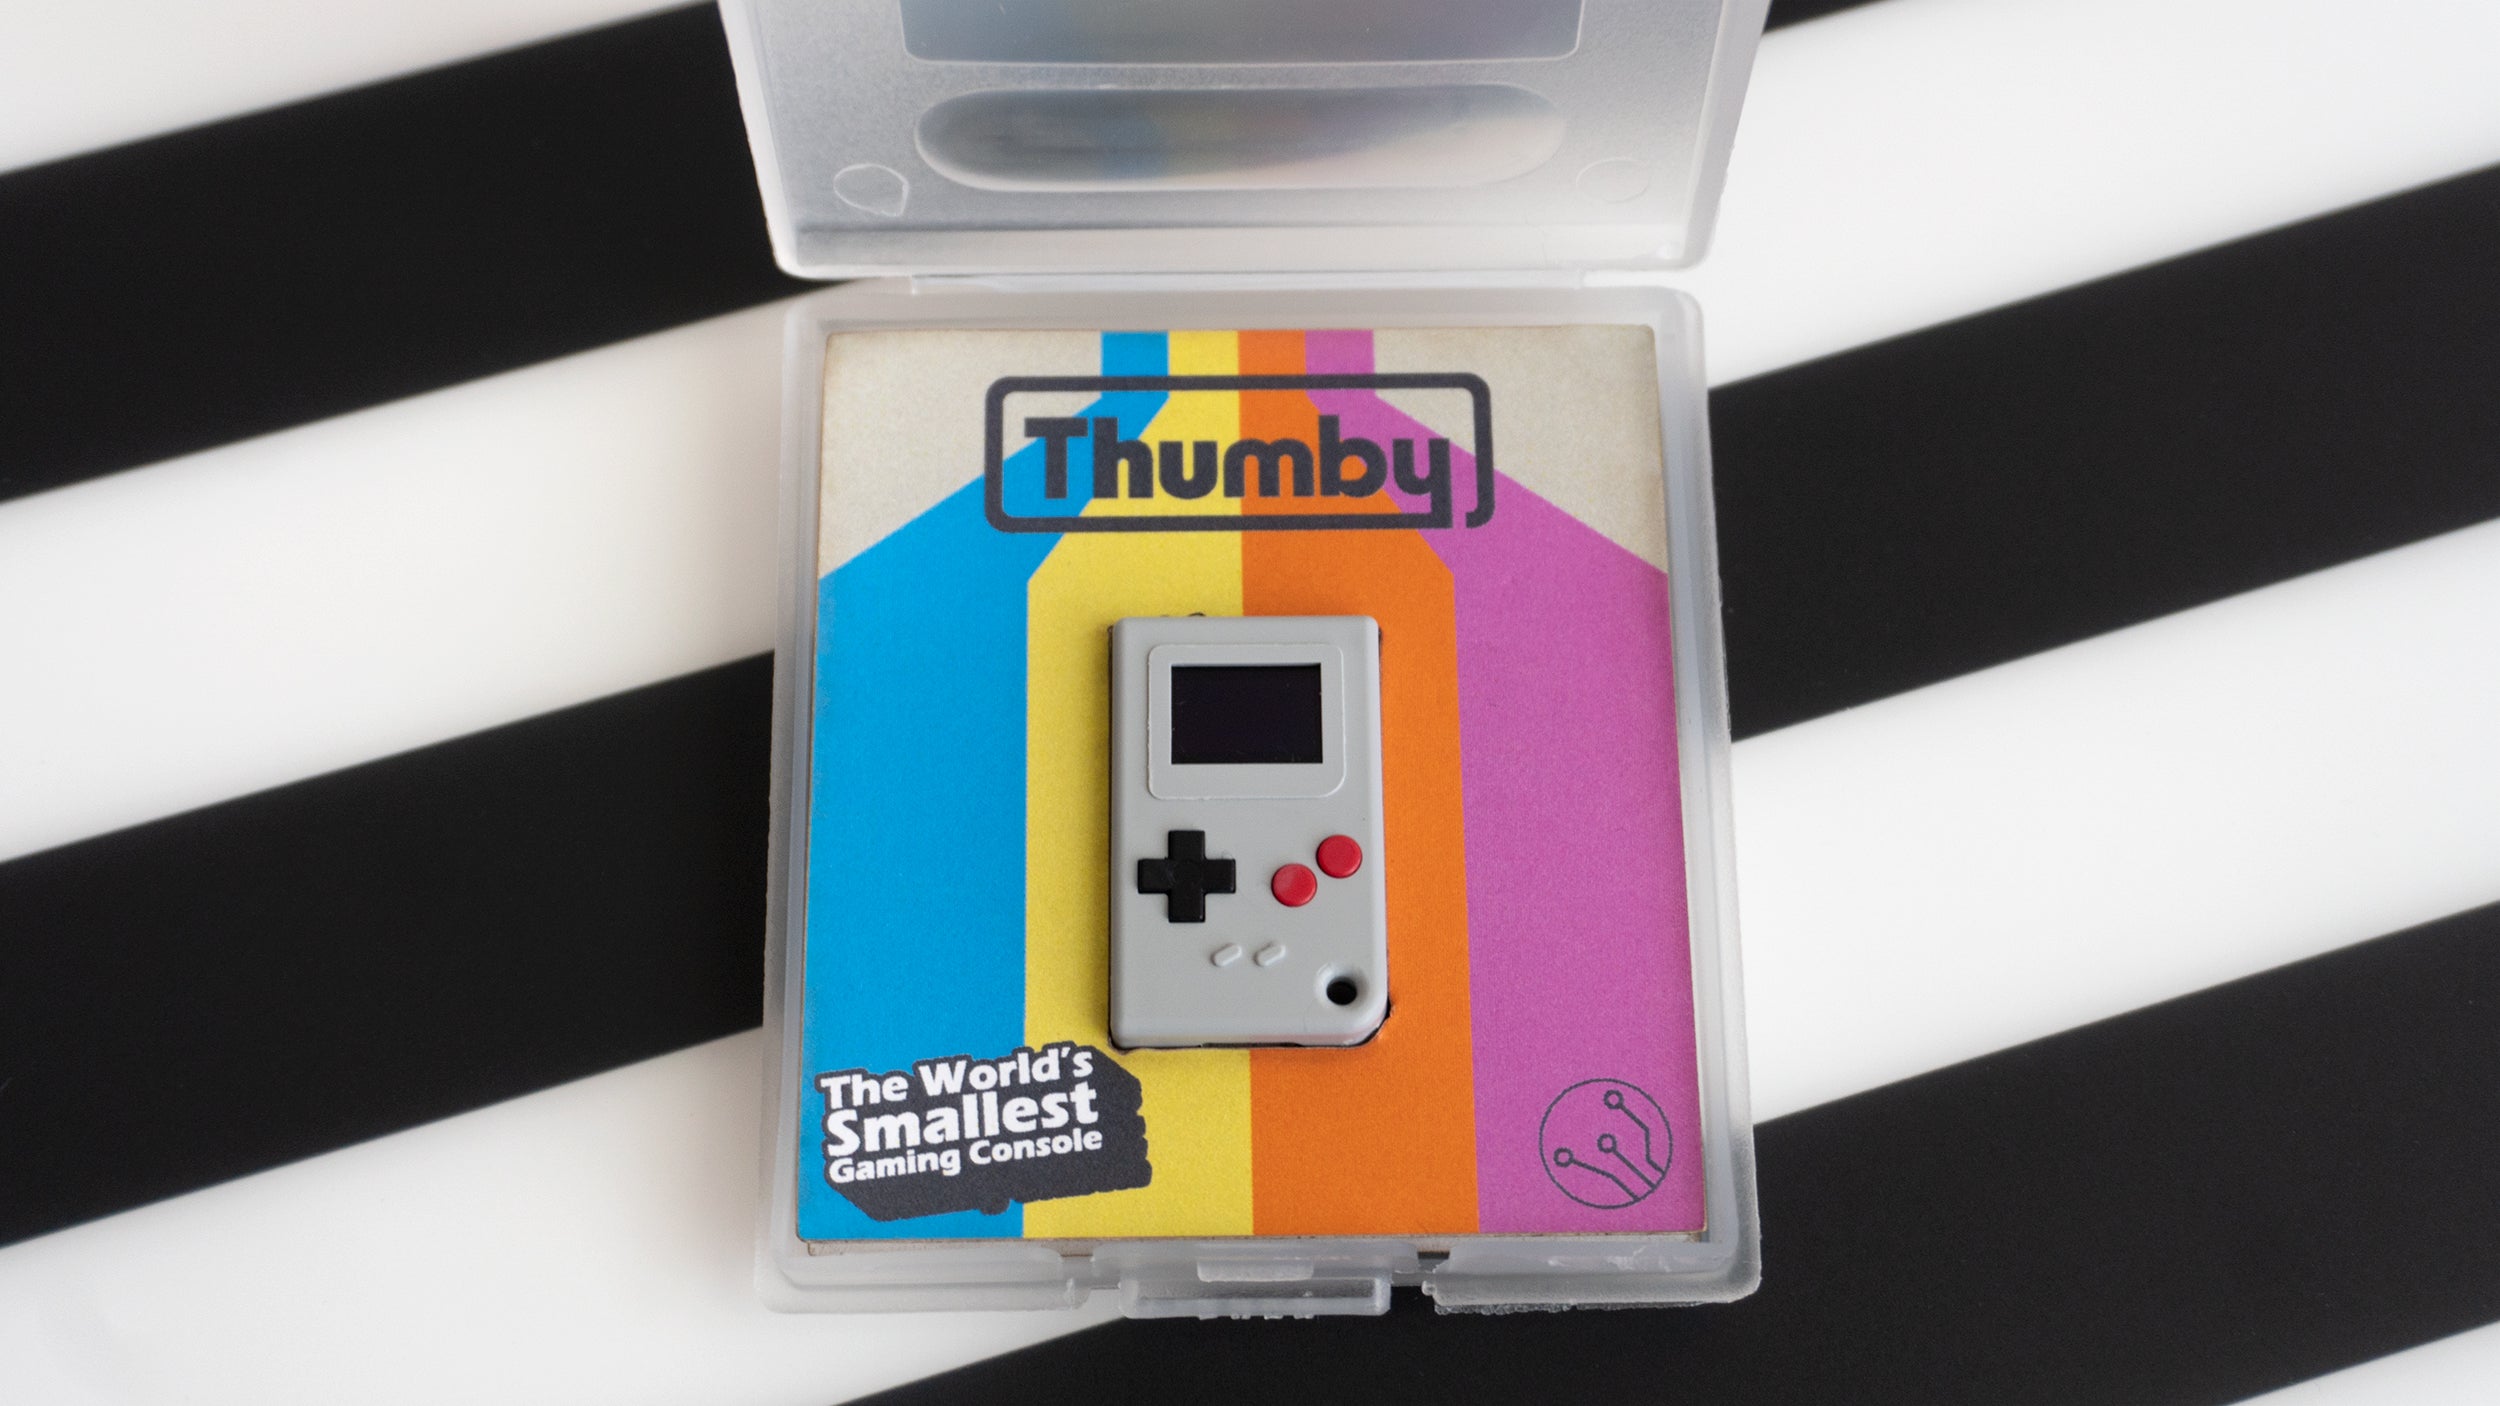 The Thumby we tested came inside a protected case for a Game Boy cartridge, with lots of room to spare. (Photo: Andrew Liszewski - Gizmodo)